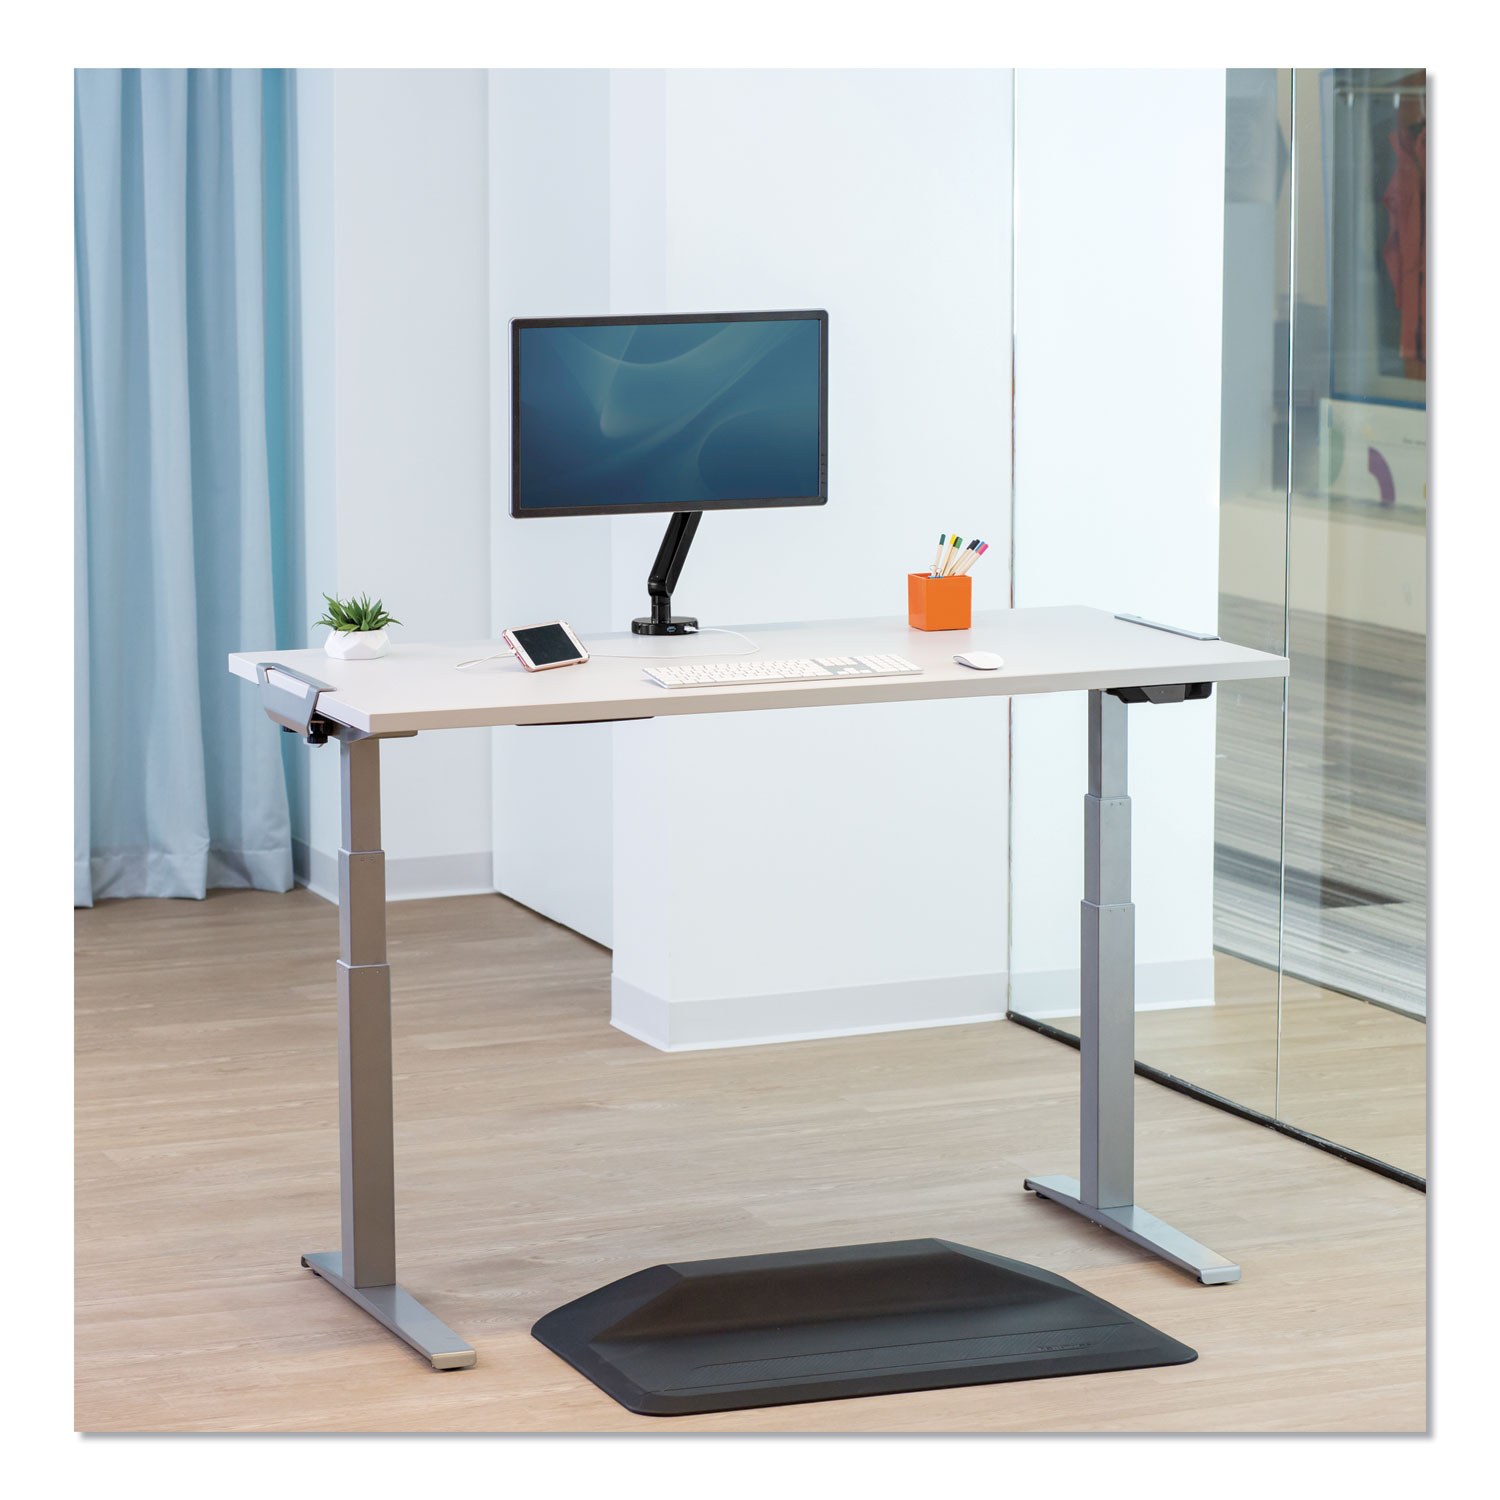  Fellowes 9649101 Levado Laminate Table Top (Top Only), 48w x 24d, White (FEL9649101) 